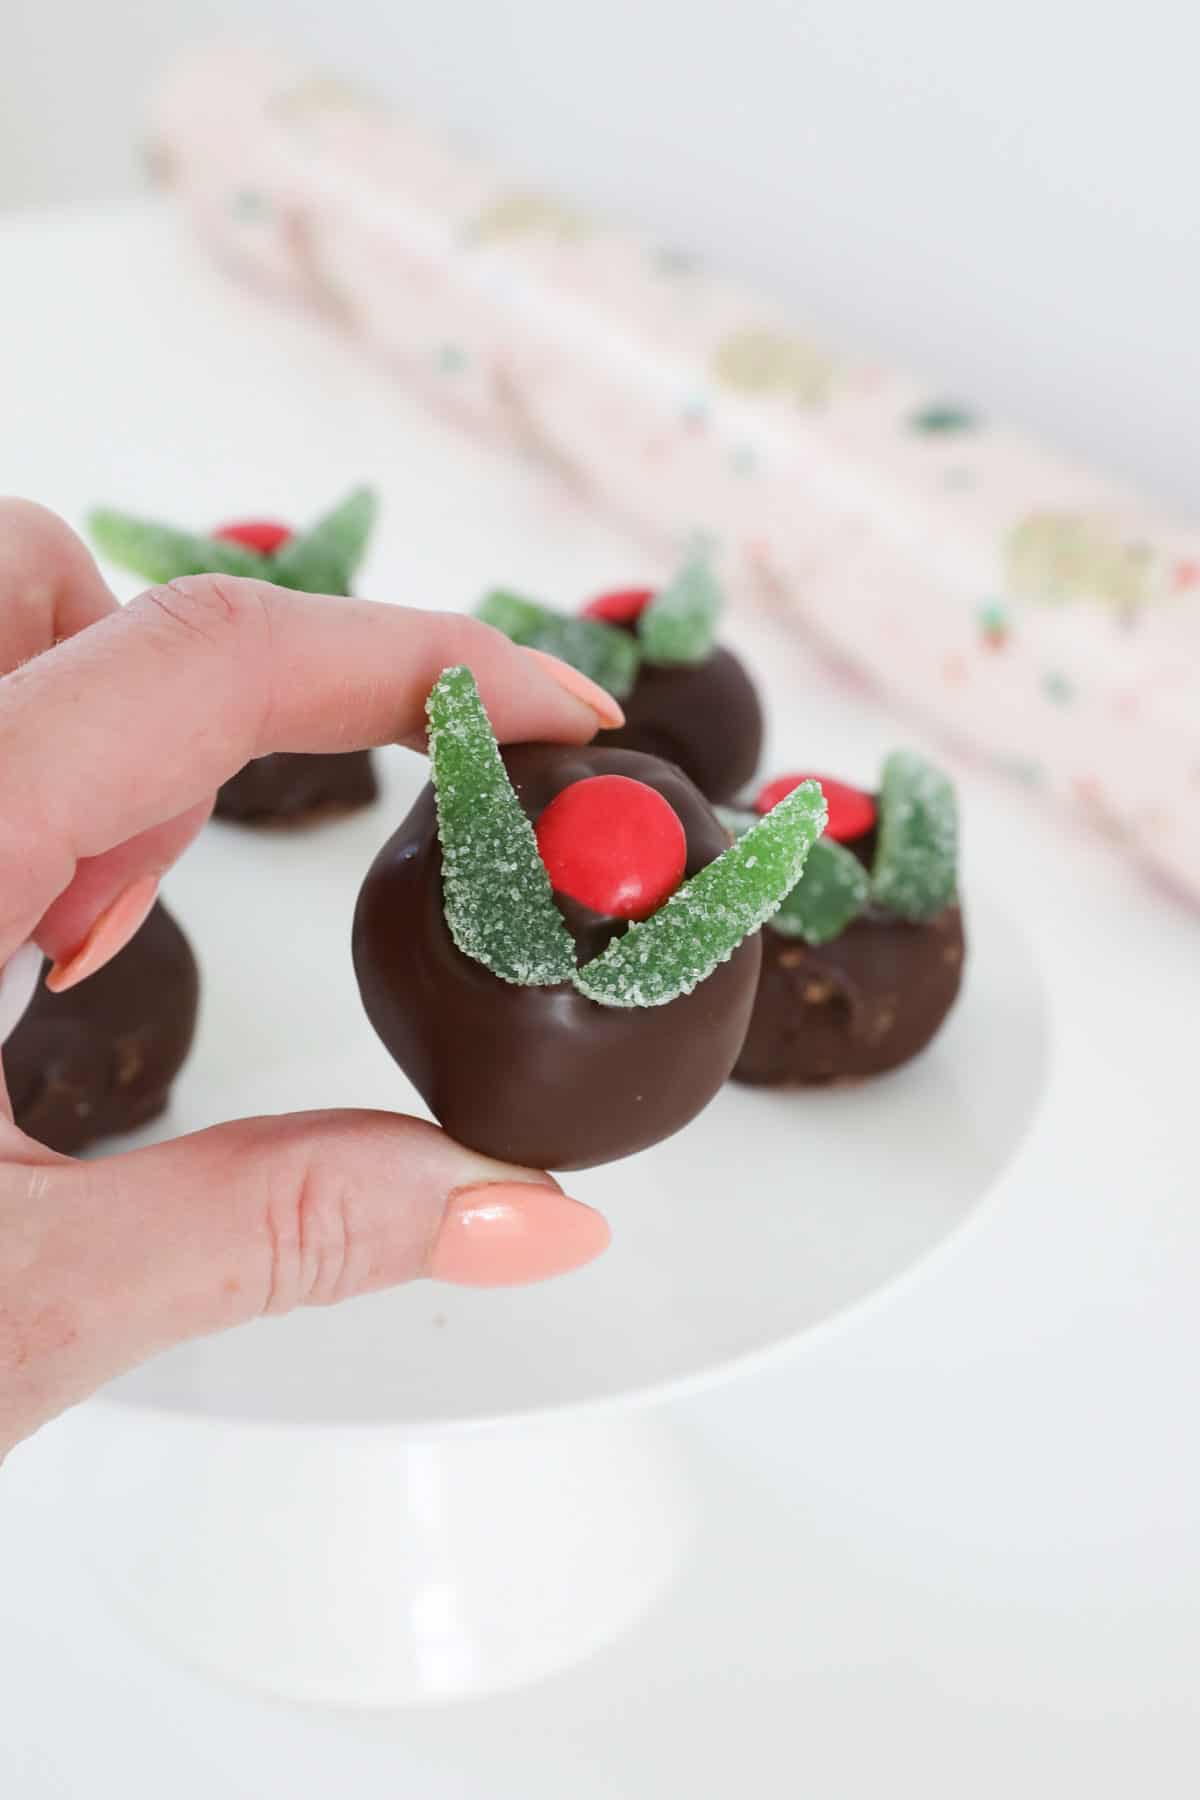 A handholding a Christmas peppermint cheesecake ball.